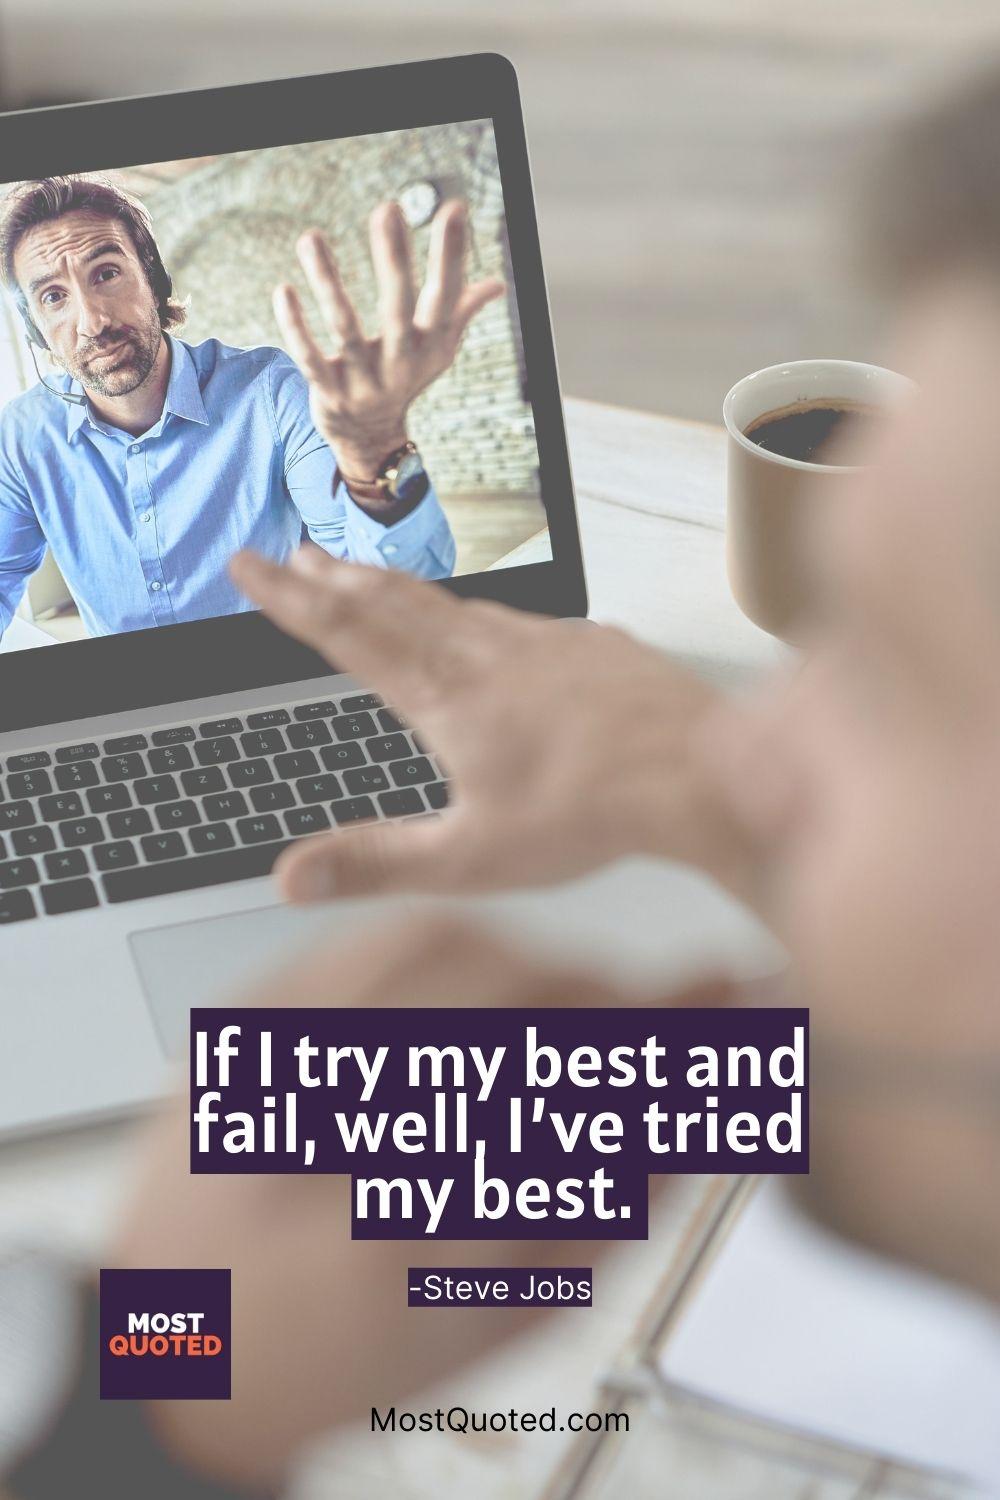 If I try my best and fail, well, I’ve tried my best. - Steve Jobs